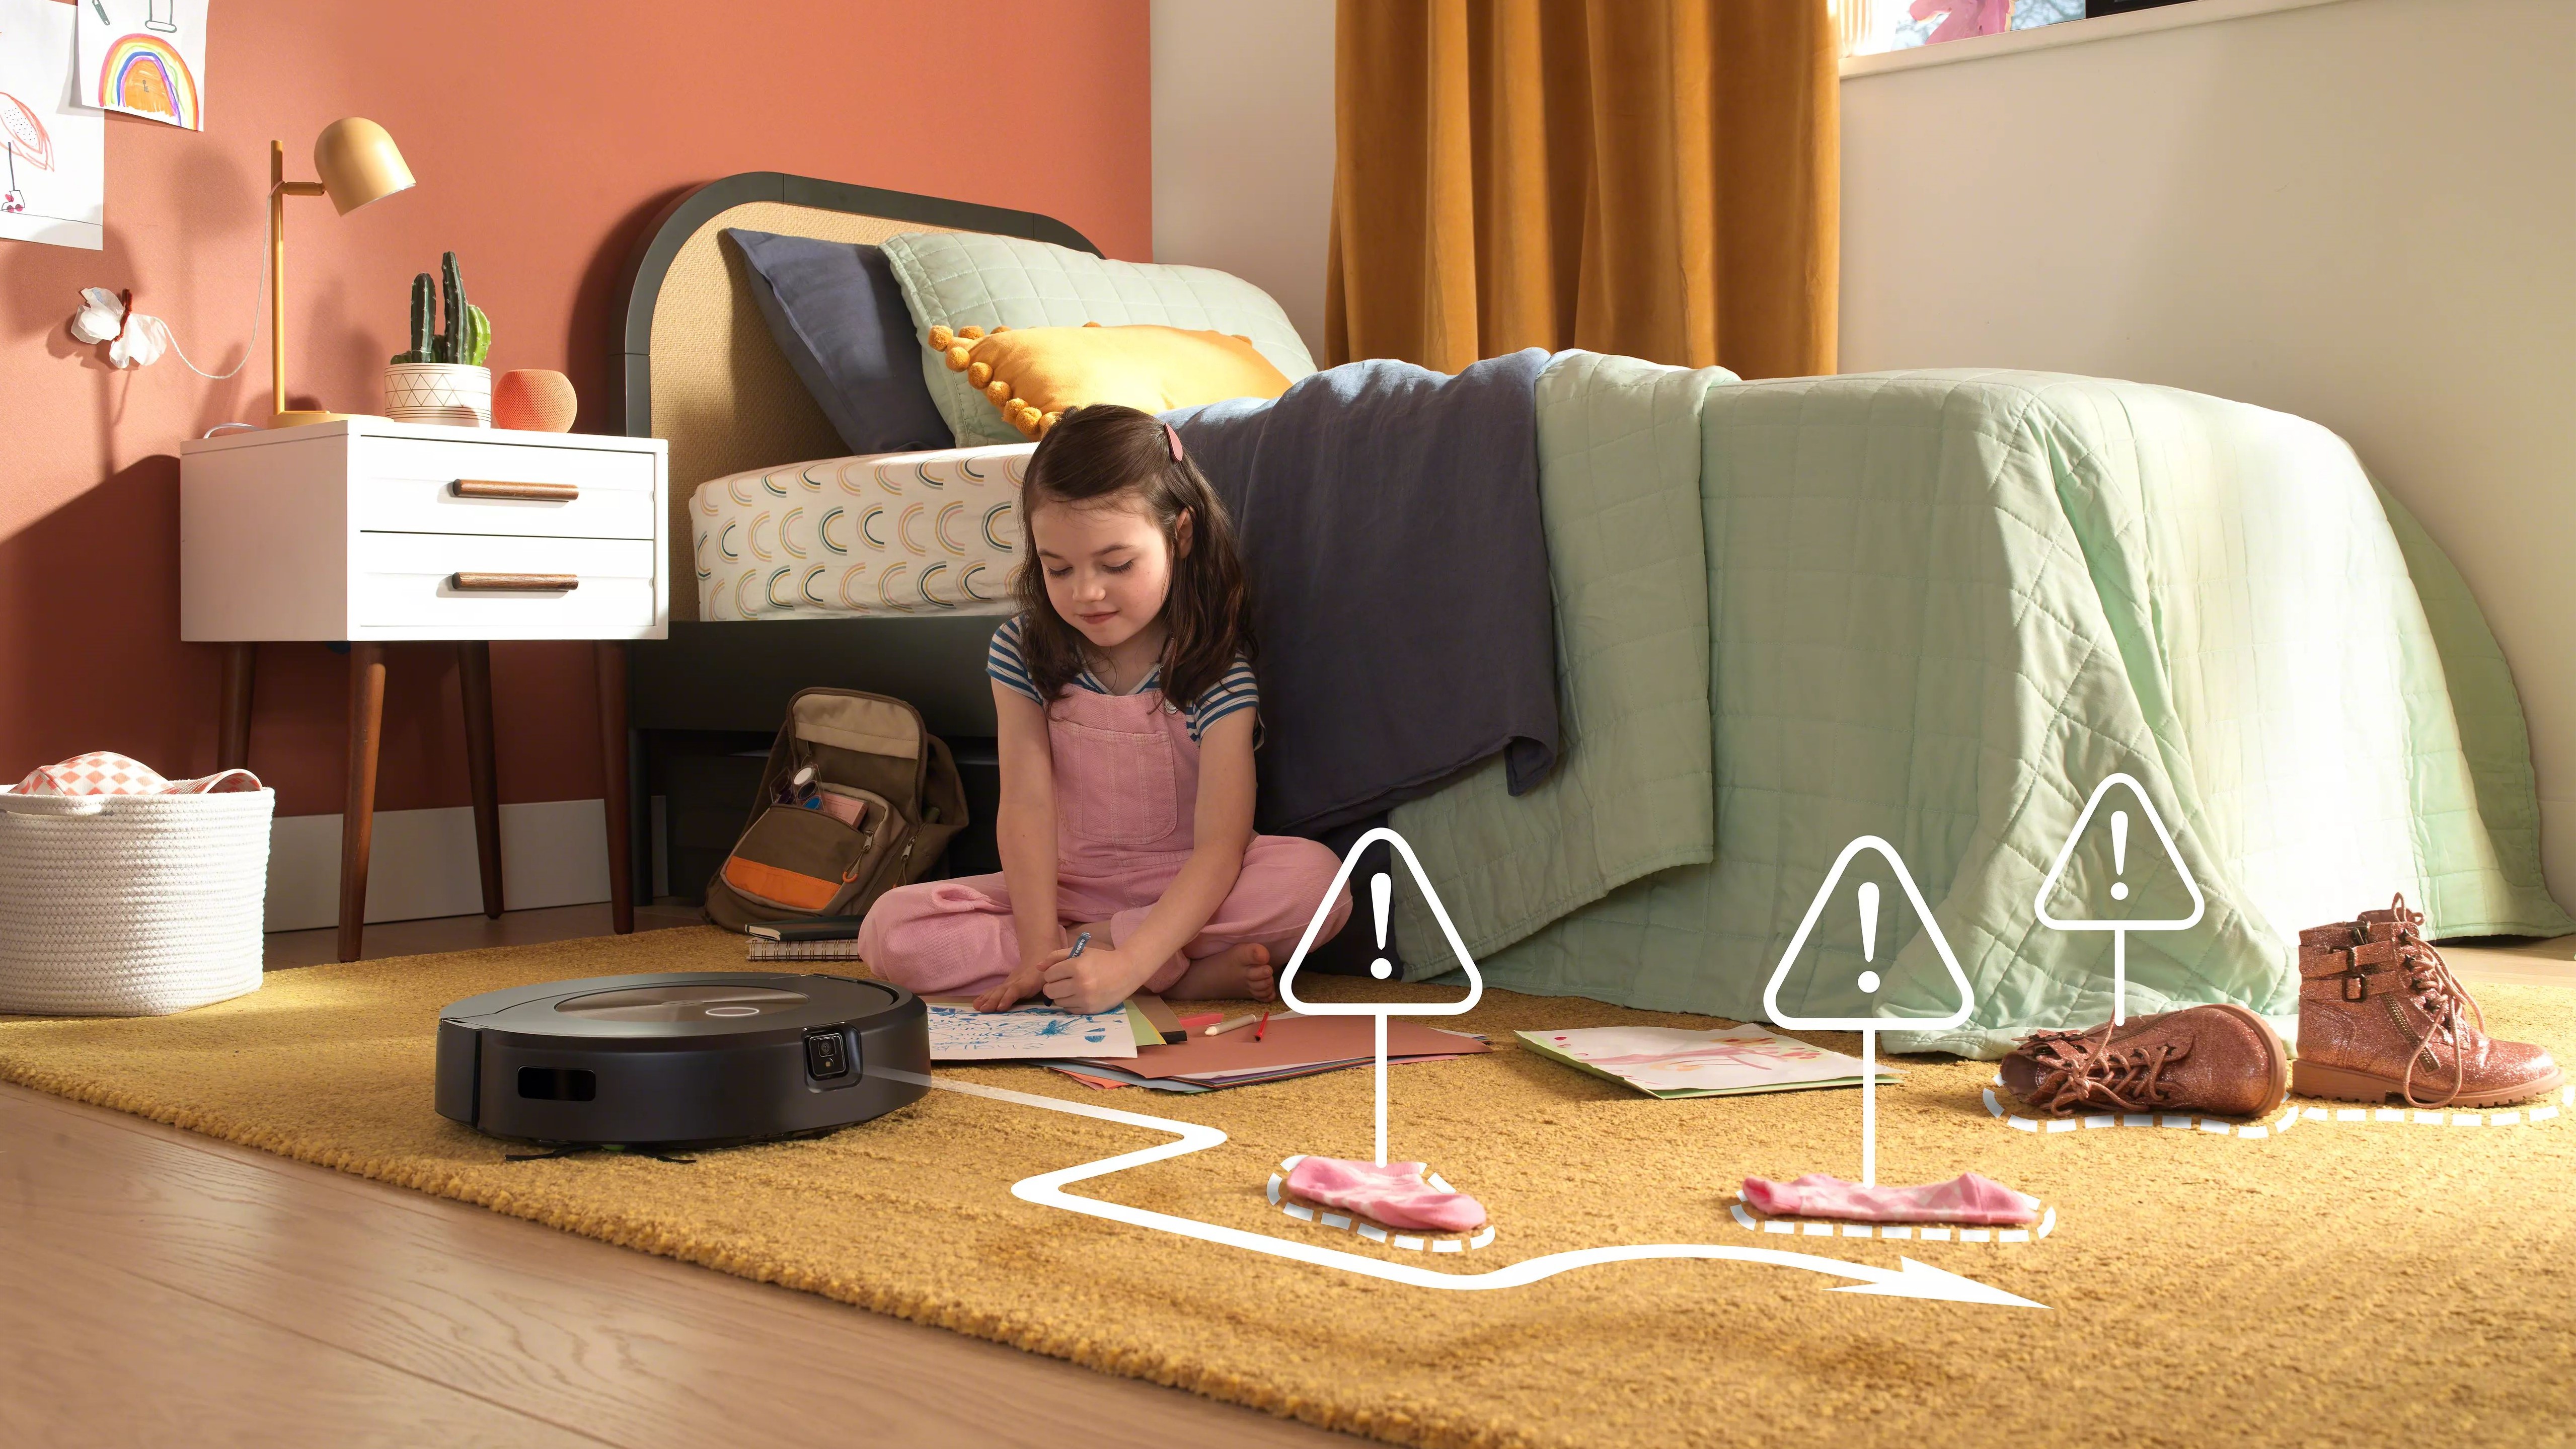 A Roomba j9+ navigating a child's room with socks and boots strewn across it - and a little girl drawing on the floor.